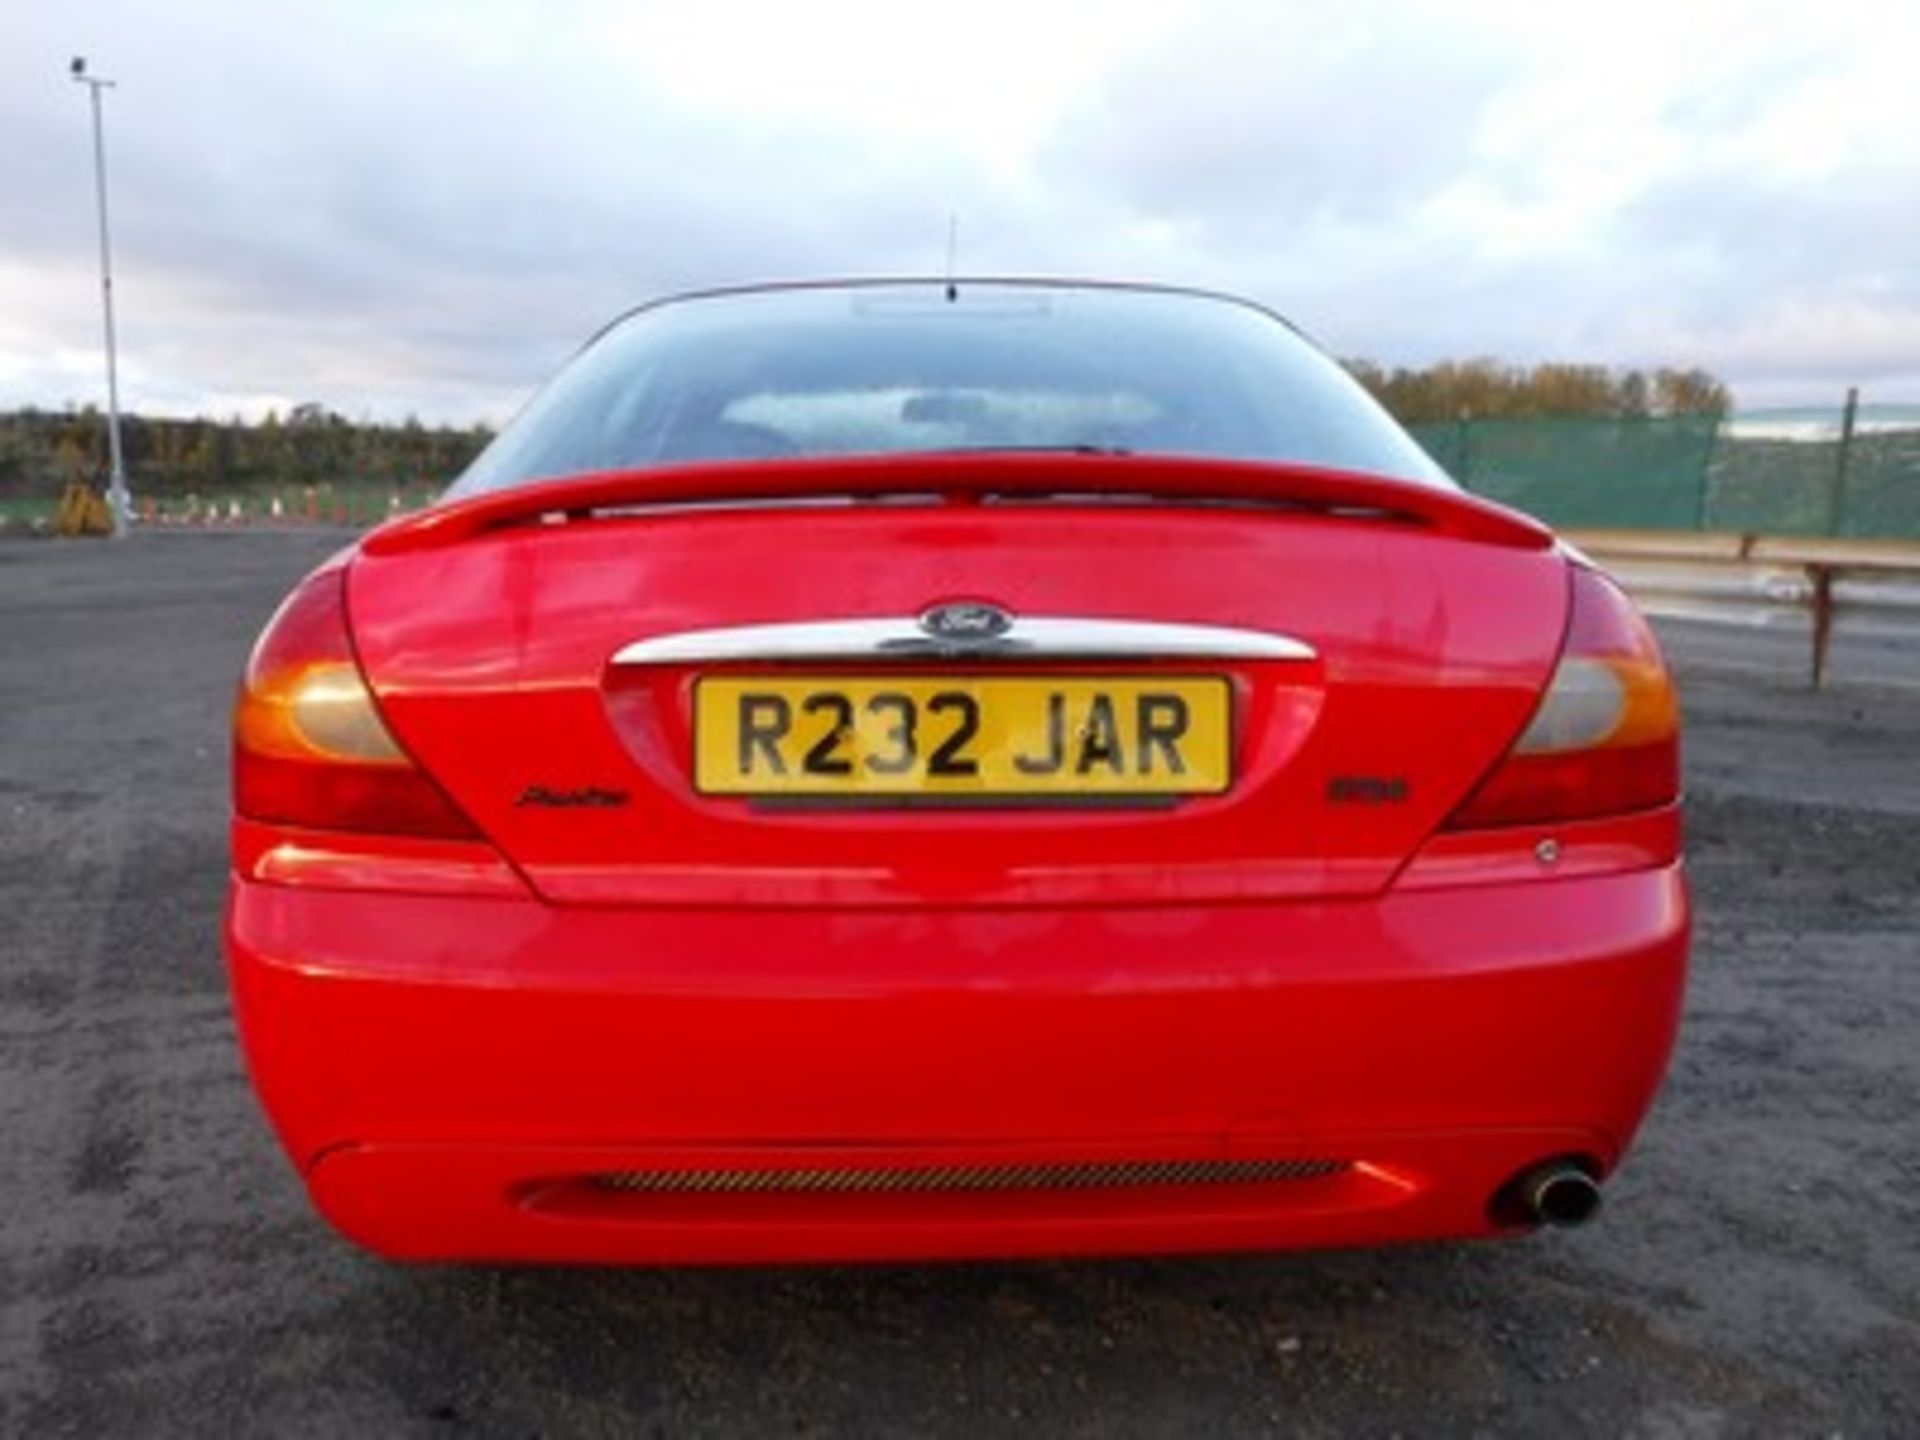 FORD MONDEO ST 24 V6 - 2497cc - Image 18 of 24